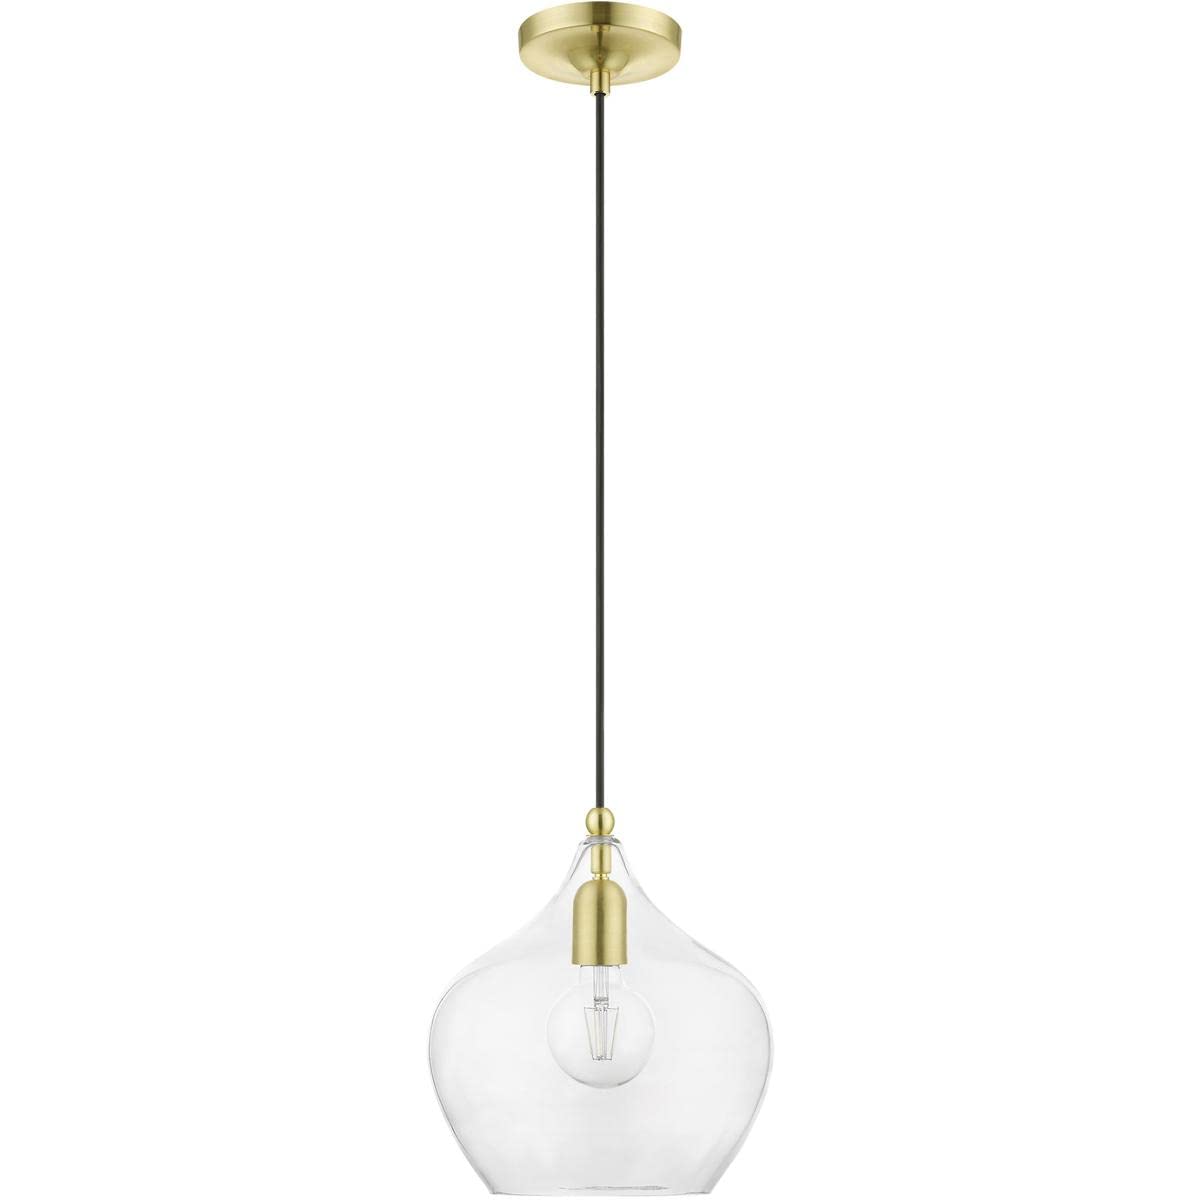 Livex Lighting 49093-12 Aldrich - 1 Light Pendant In Transitional Style-17 Inches Tall and 9.75 Inches Wide, Aldrich - 1 Light Pendant In Transitional Style-17 Inches Tall and 9.75 Inches Wide